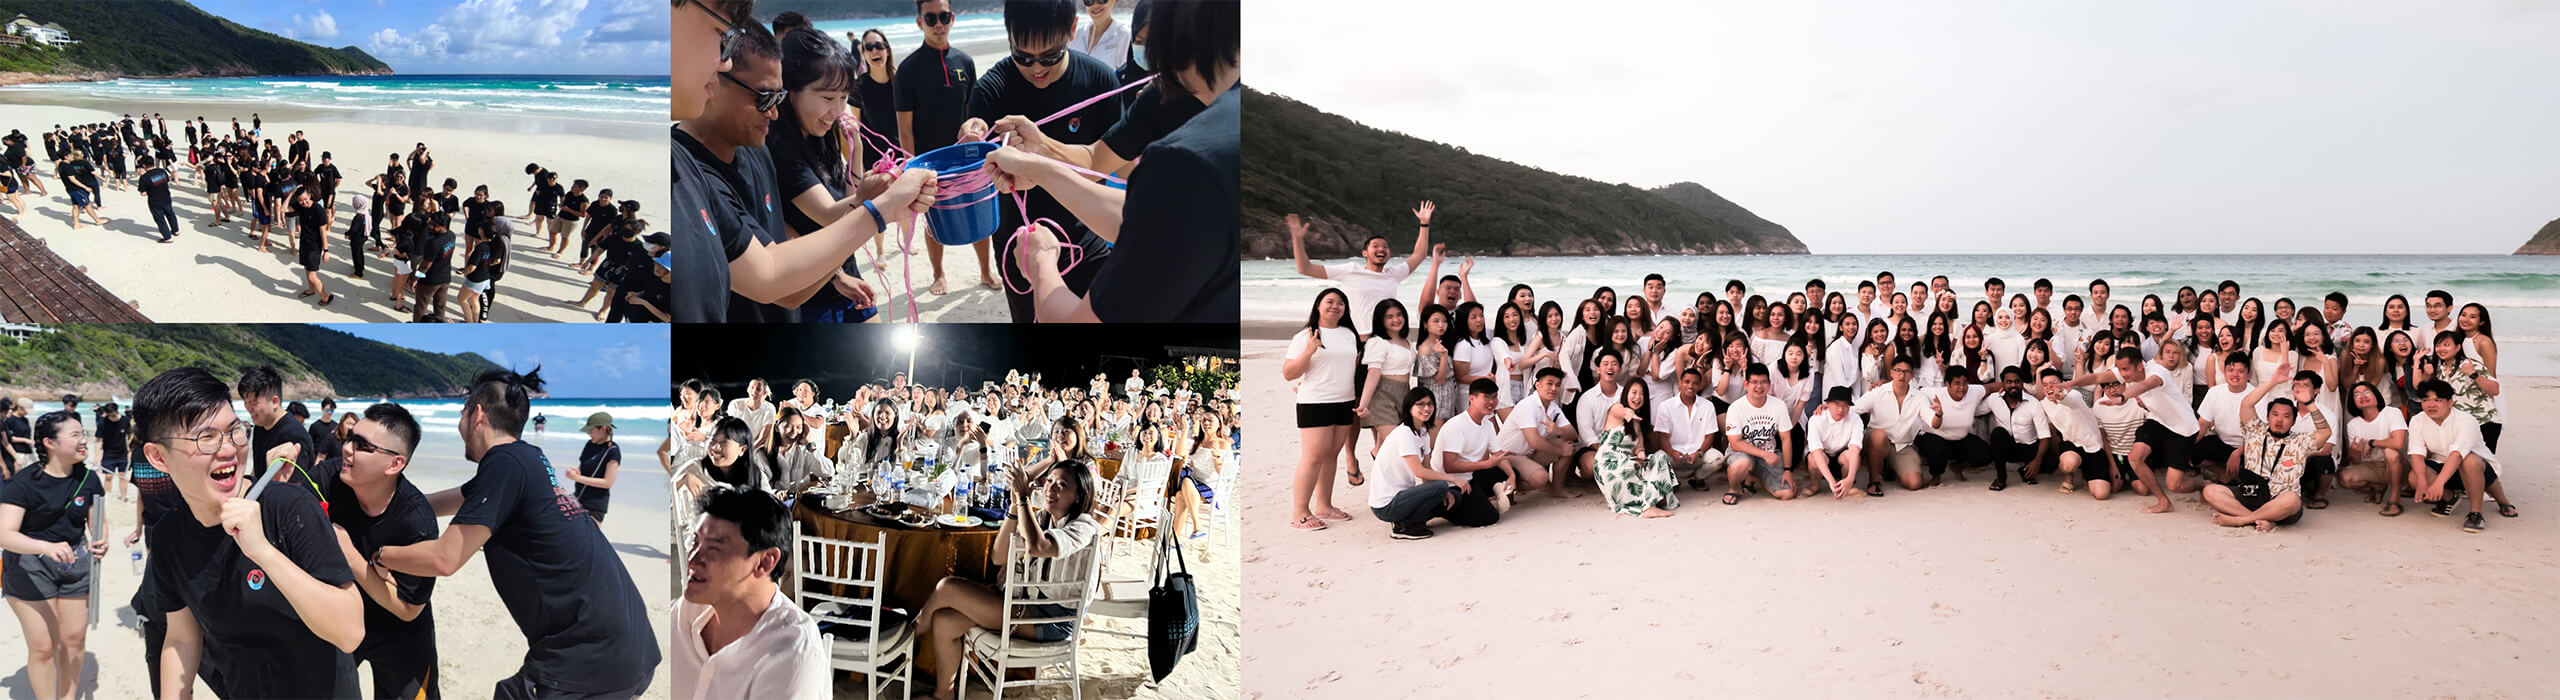 Our first company trip to Redang Island. A memorable trip of continuous fun in the sun in celebration of our 10th year anniversary.  